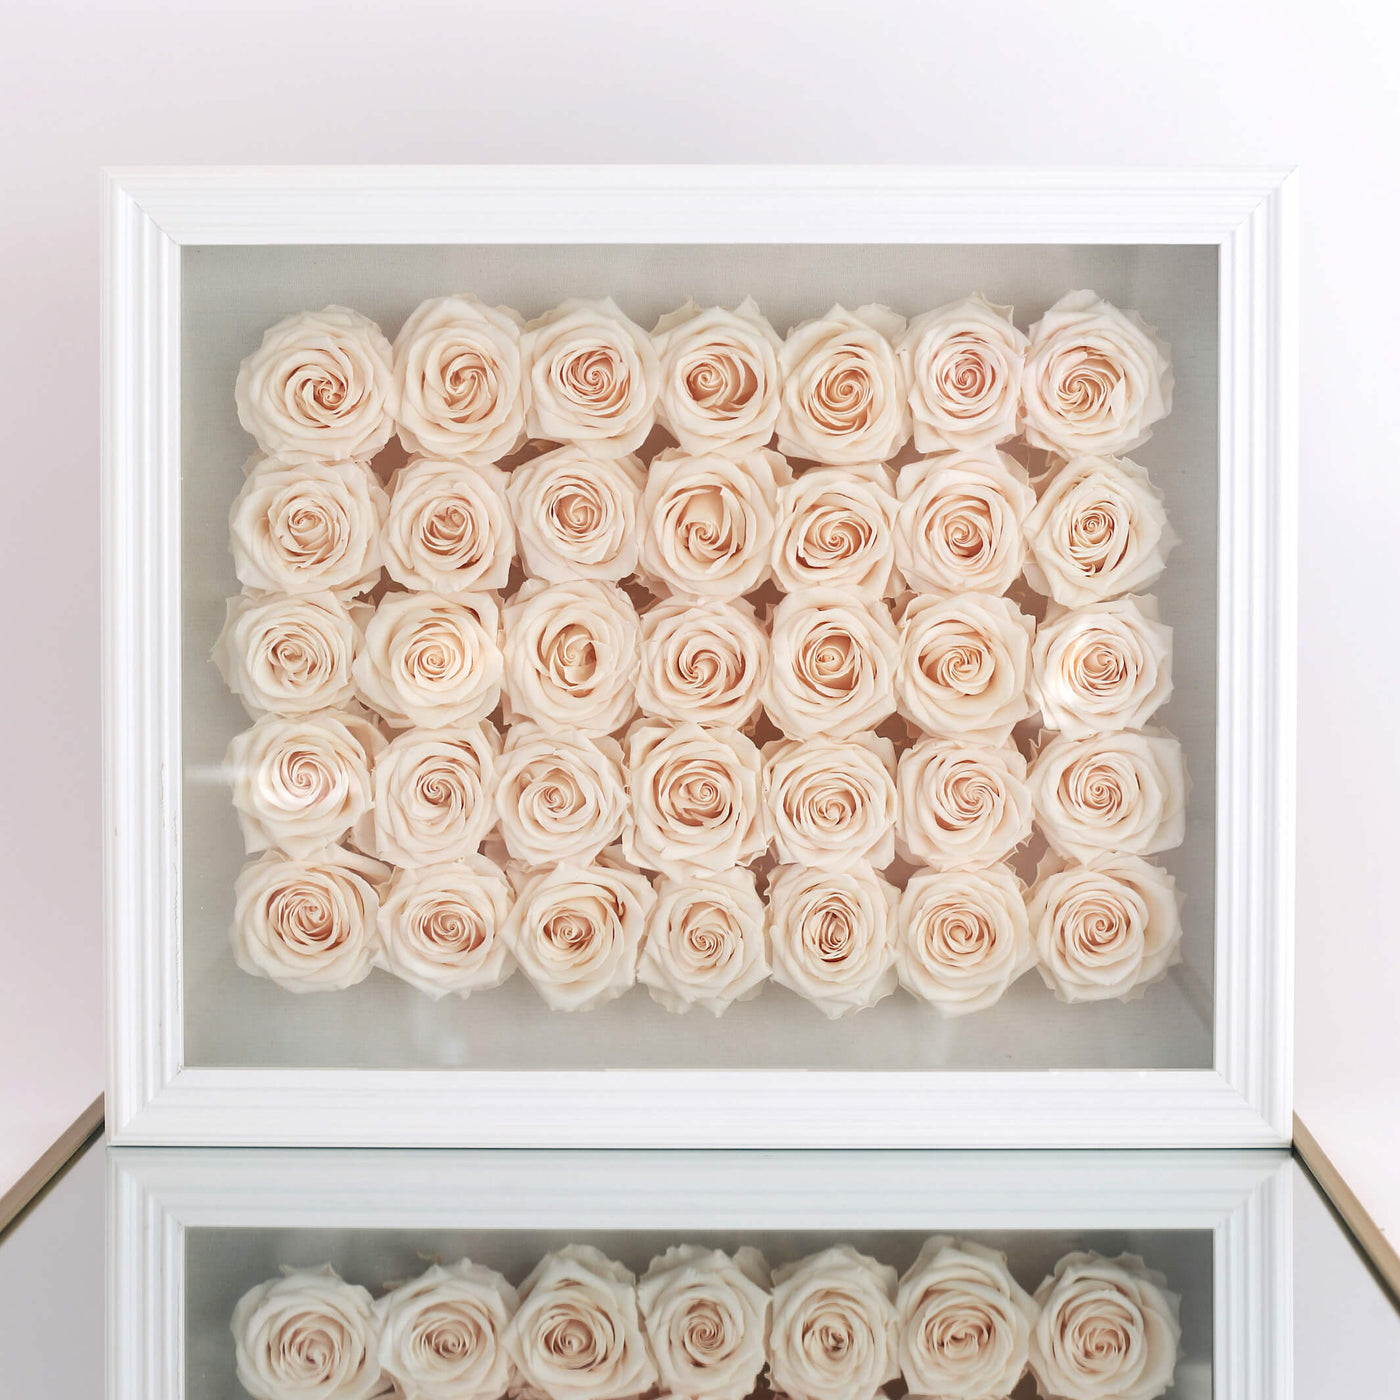 Forever roses set in a large rectangular shadow box